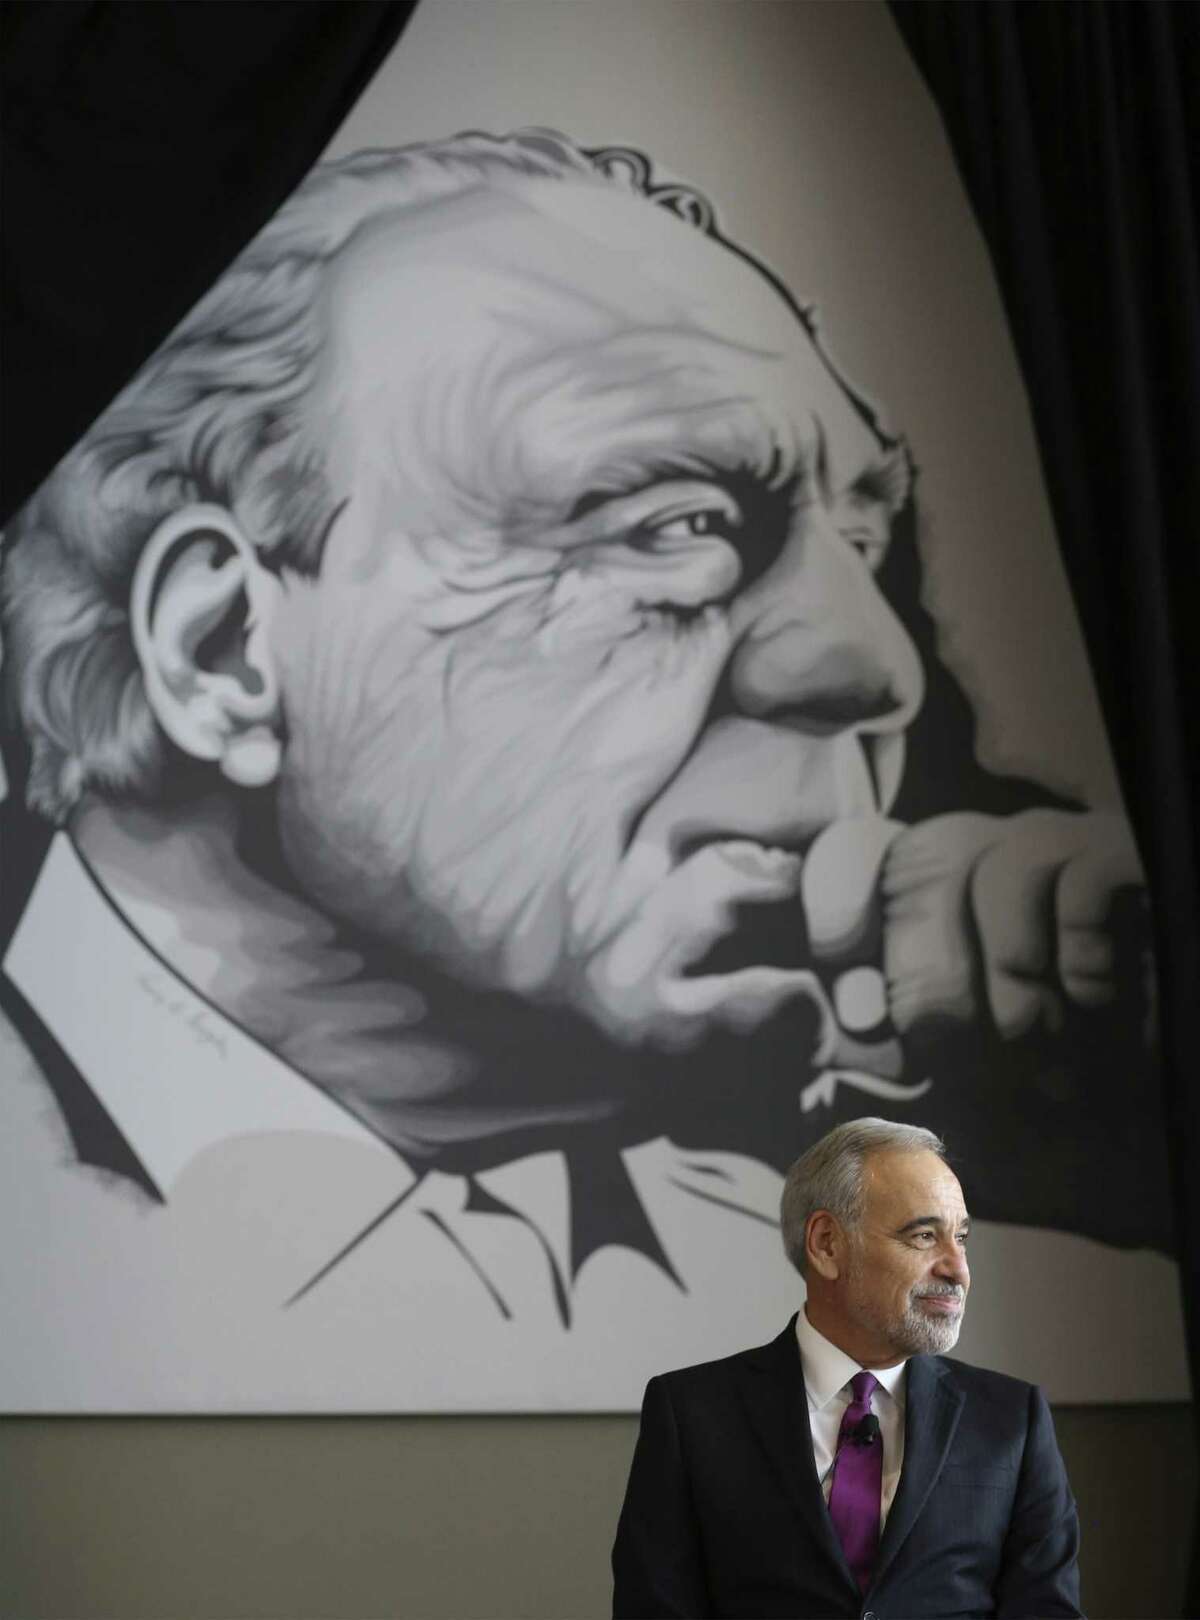 Former Congressional Representative Charlie Gonzalez sits under a mural of his father - one of San Antonio's most iconic politicians - Congressman Henry B. Gonzalez as family, friend and admirers gather at the Convention Center to see the unveiling of Gonzalez's resurrected mural on Wednesday, May 15, 2019. The original mural was painted by artist Ronald Rocha at Estela's Mexican Restaurant on the city's West Side but was painted over by building's new owners. Through an effort by businessman Louis Escareno and many others, a larger than life rendering of the mural was digitally recreated by UTSA adjunct professor and artist Analy Diego and unveiled on Wednesday evening. (Kin Man Hui/San Antonio Express-News)